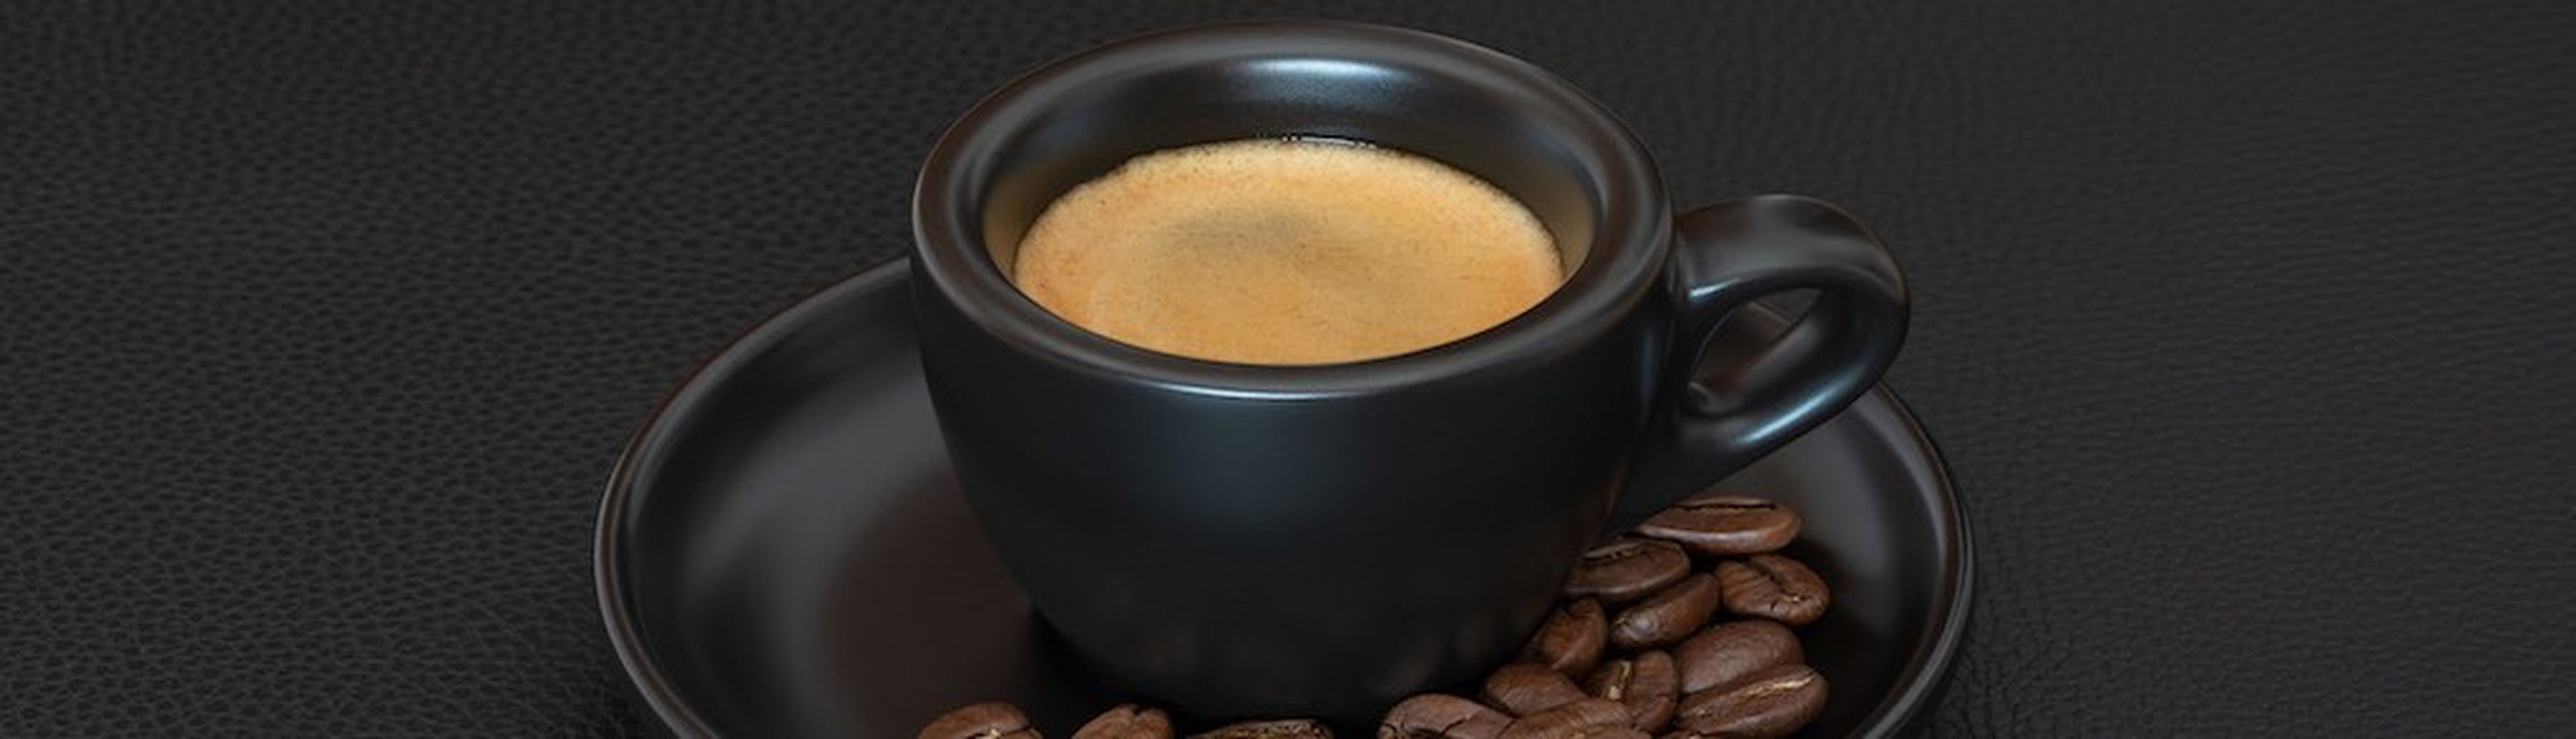 Original italian espresso in black cup on leather background with coffee beans